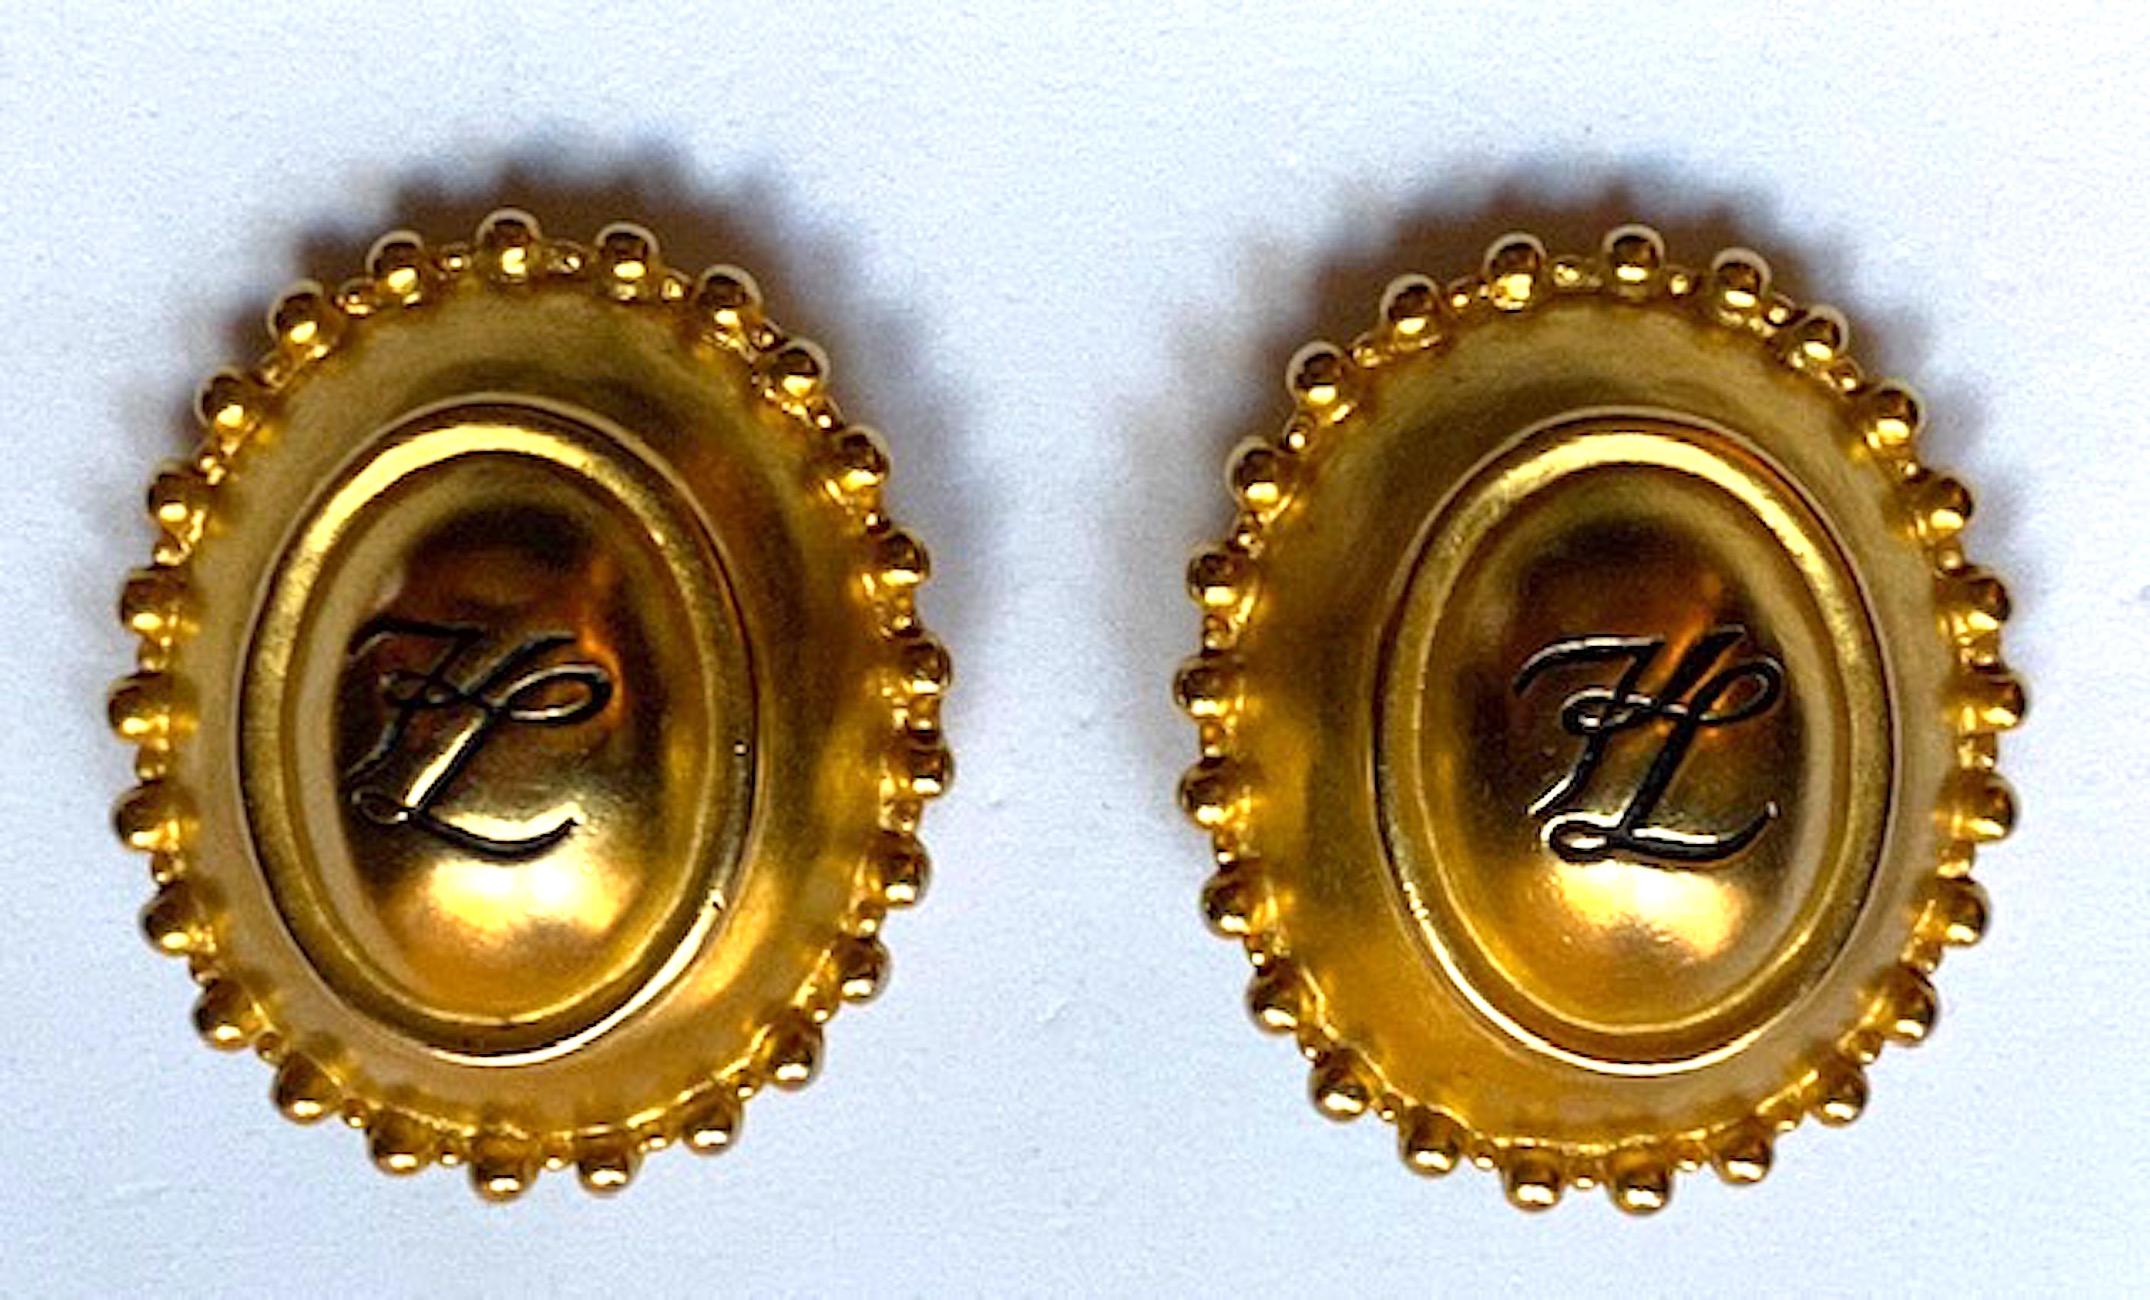 Karl Lagerfeld 1980s satin gold plate oval button earrings with KL monogram. Each earring is a domed button measuring 1.38 inches wide, 1.63 inches long an .63 of an inch high. The back has the Lagerfeld fan along with a circle stamp with KL script